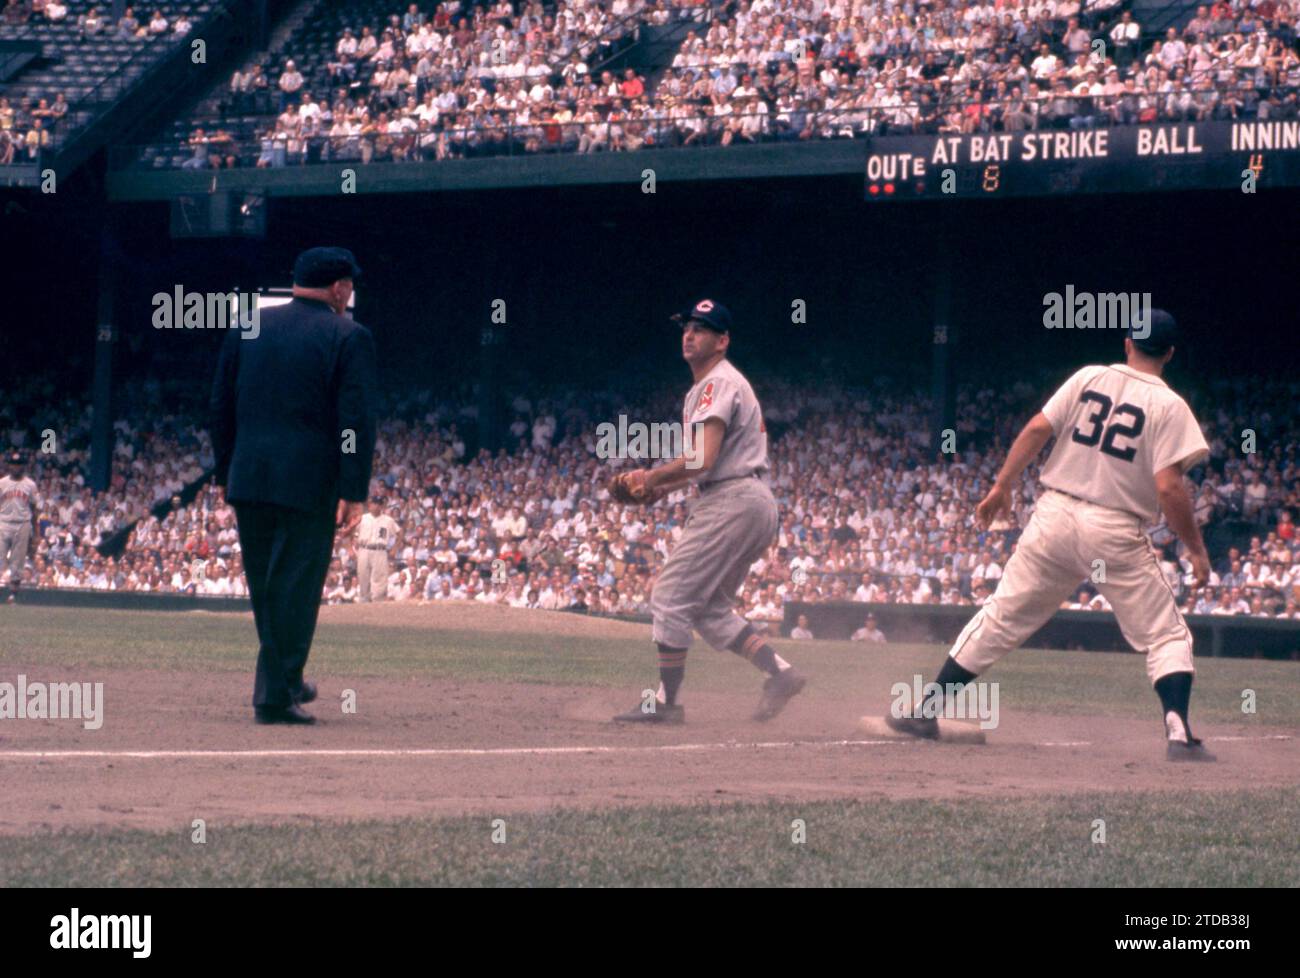 DETROIT, MI - JULY 5: Third baseman Granny Hamner #7 of the Cleveland Indians misses the tag as Bobo Osborne #32 of the Detroit Tigers reaches third base as umpire Bill Summers is there to make the call during an MLB game on July 5, 1959 at Briggs Stadium in Detroit, Michigan. (Photo by Hy Peskin) *** Local Caption *** Granny Hamner;Bobo Osborne;Bill Summers Stock Photo